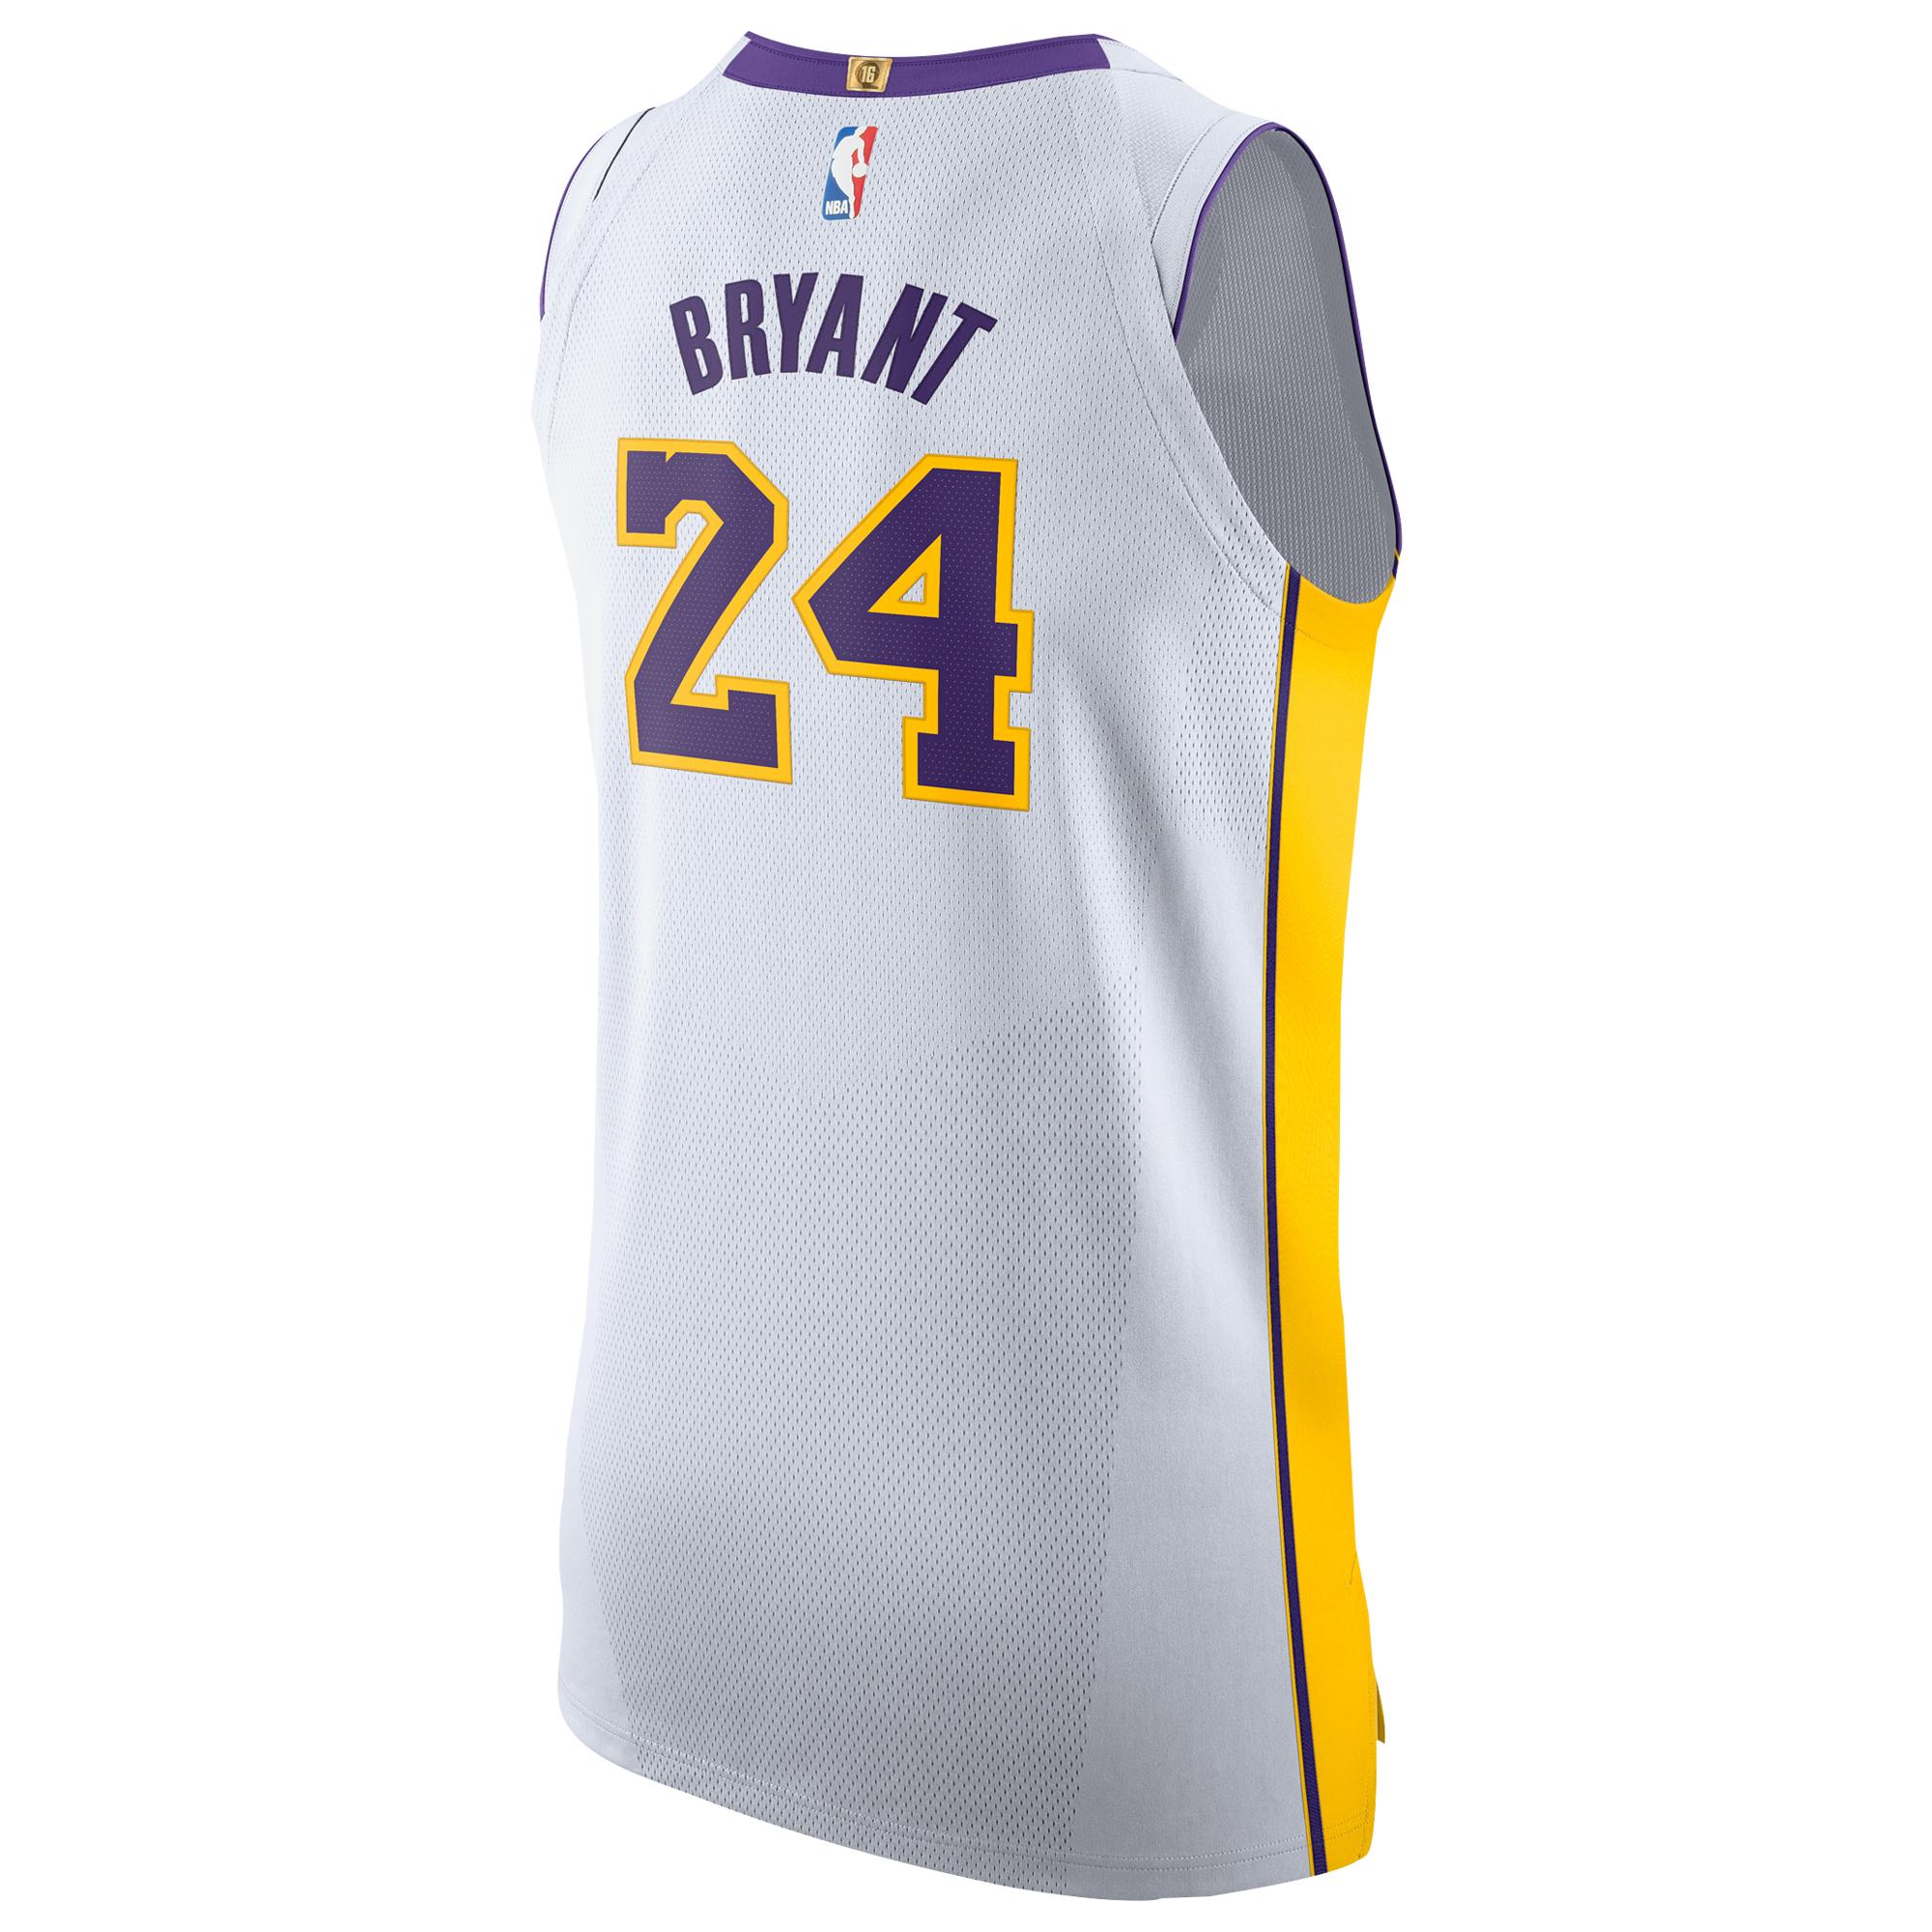 Nike Kobe Bryant Nba Authentic Jersey in White for Men - Lyst